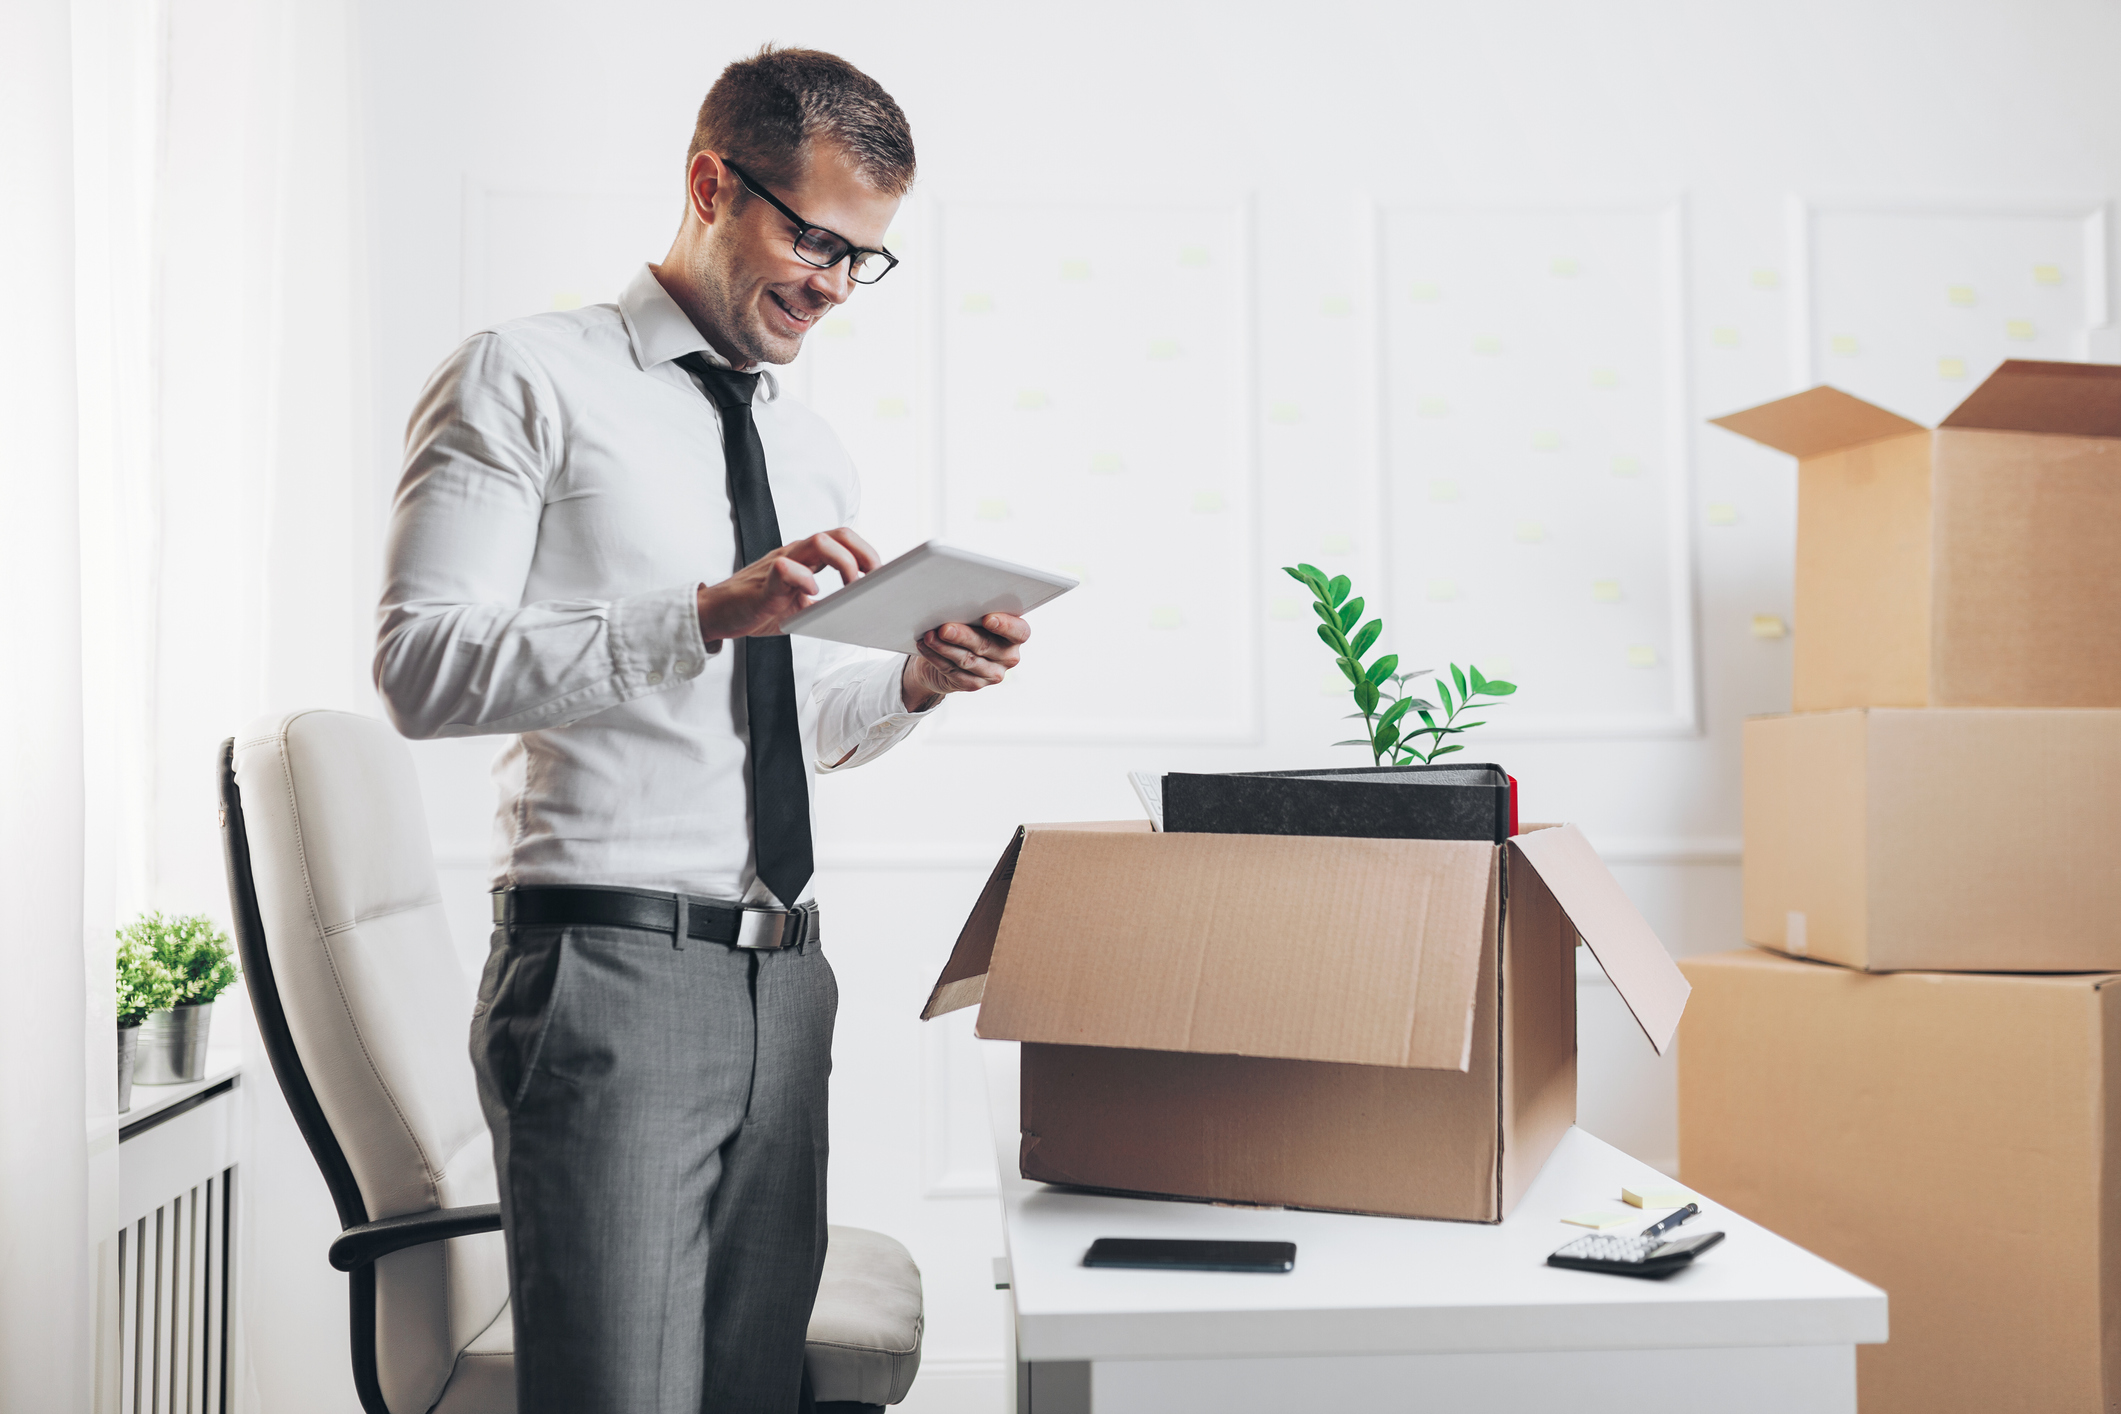 How to Tell Your Employer That You’re Moving?